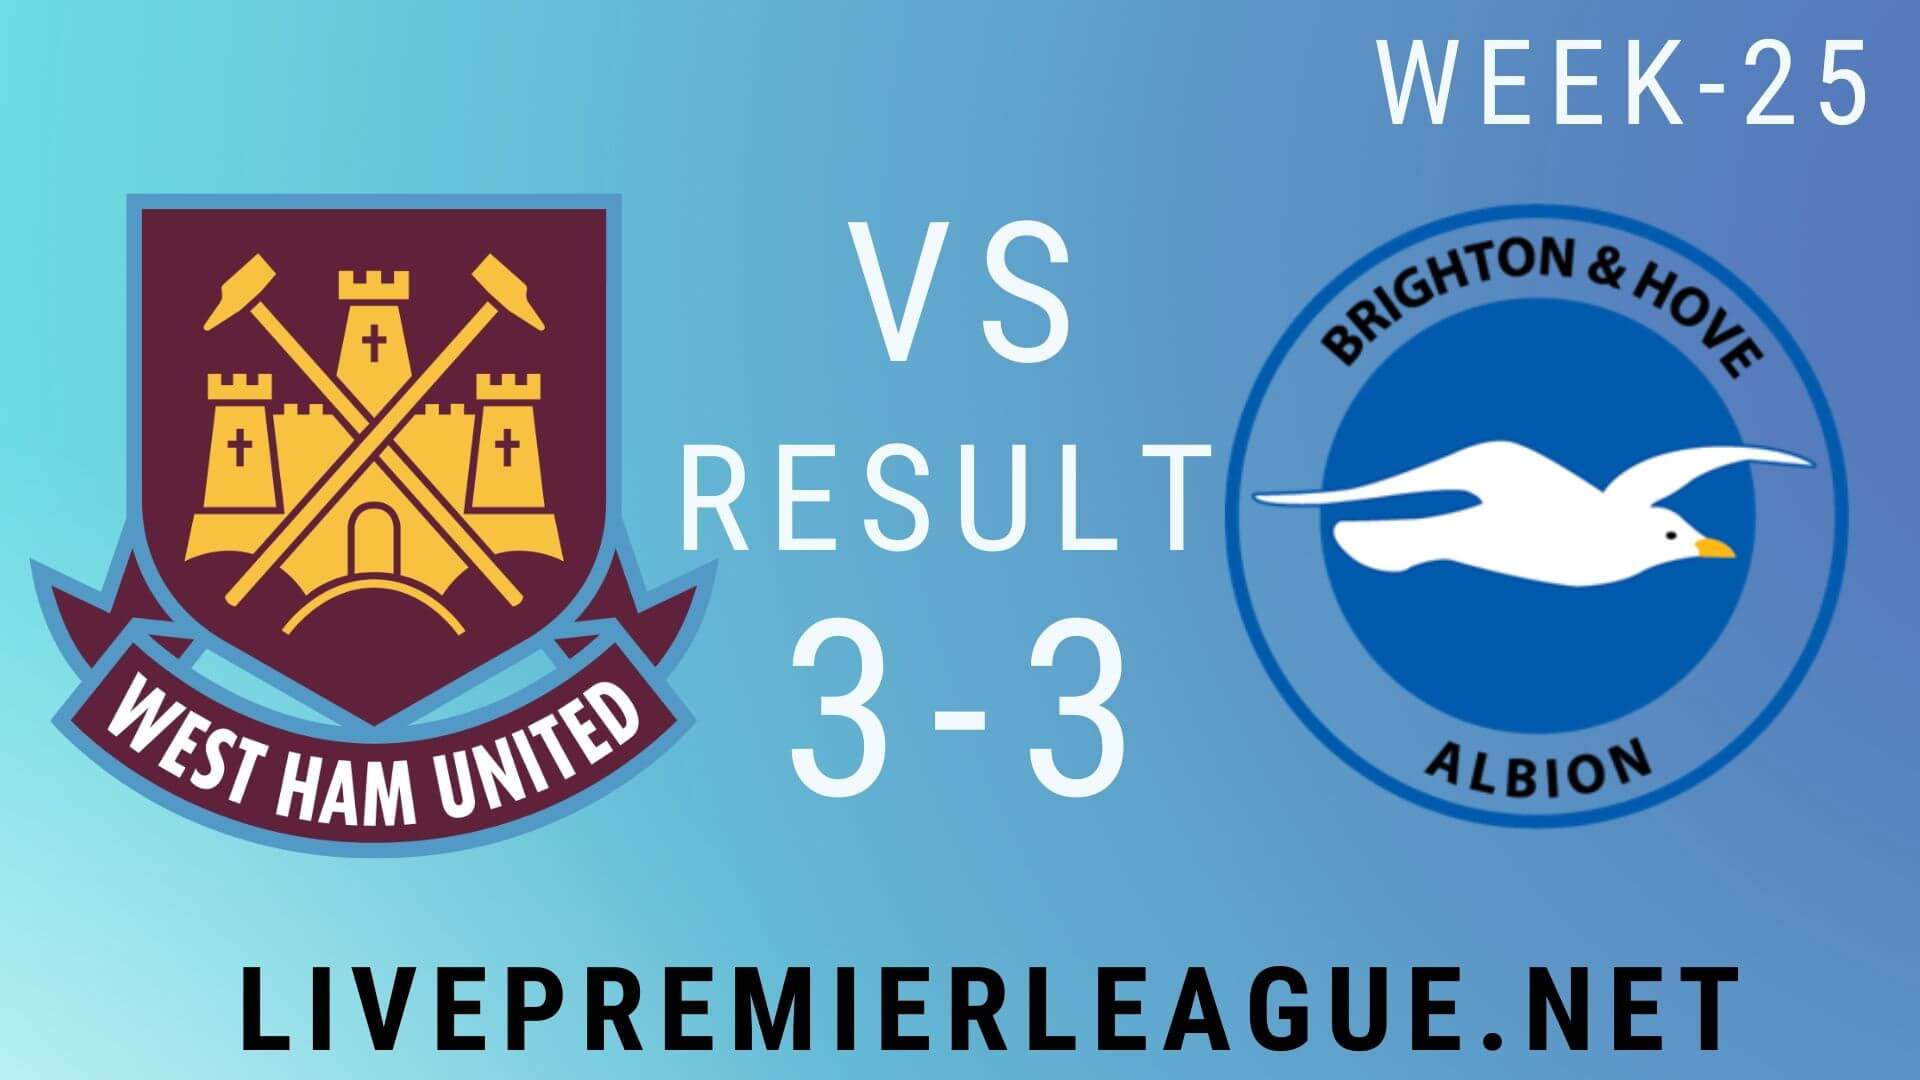 West Ham United Vs Brighton and Hove Albion | Week 25 Result 2020